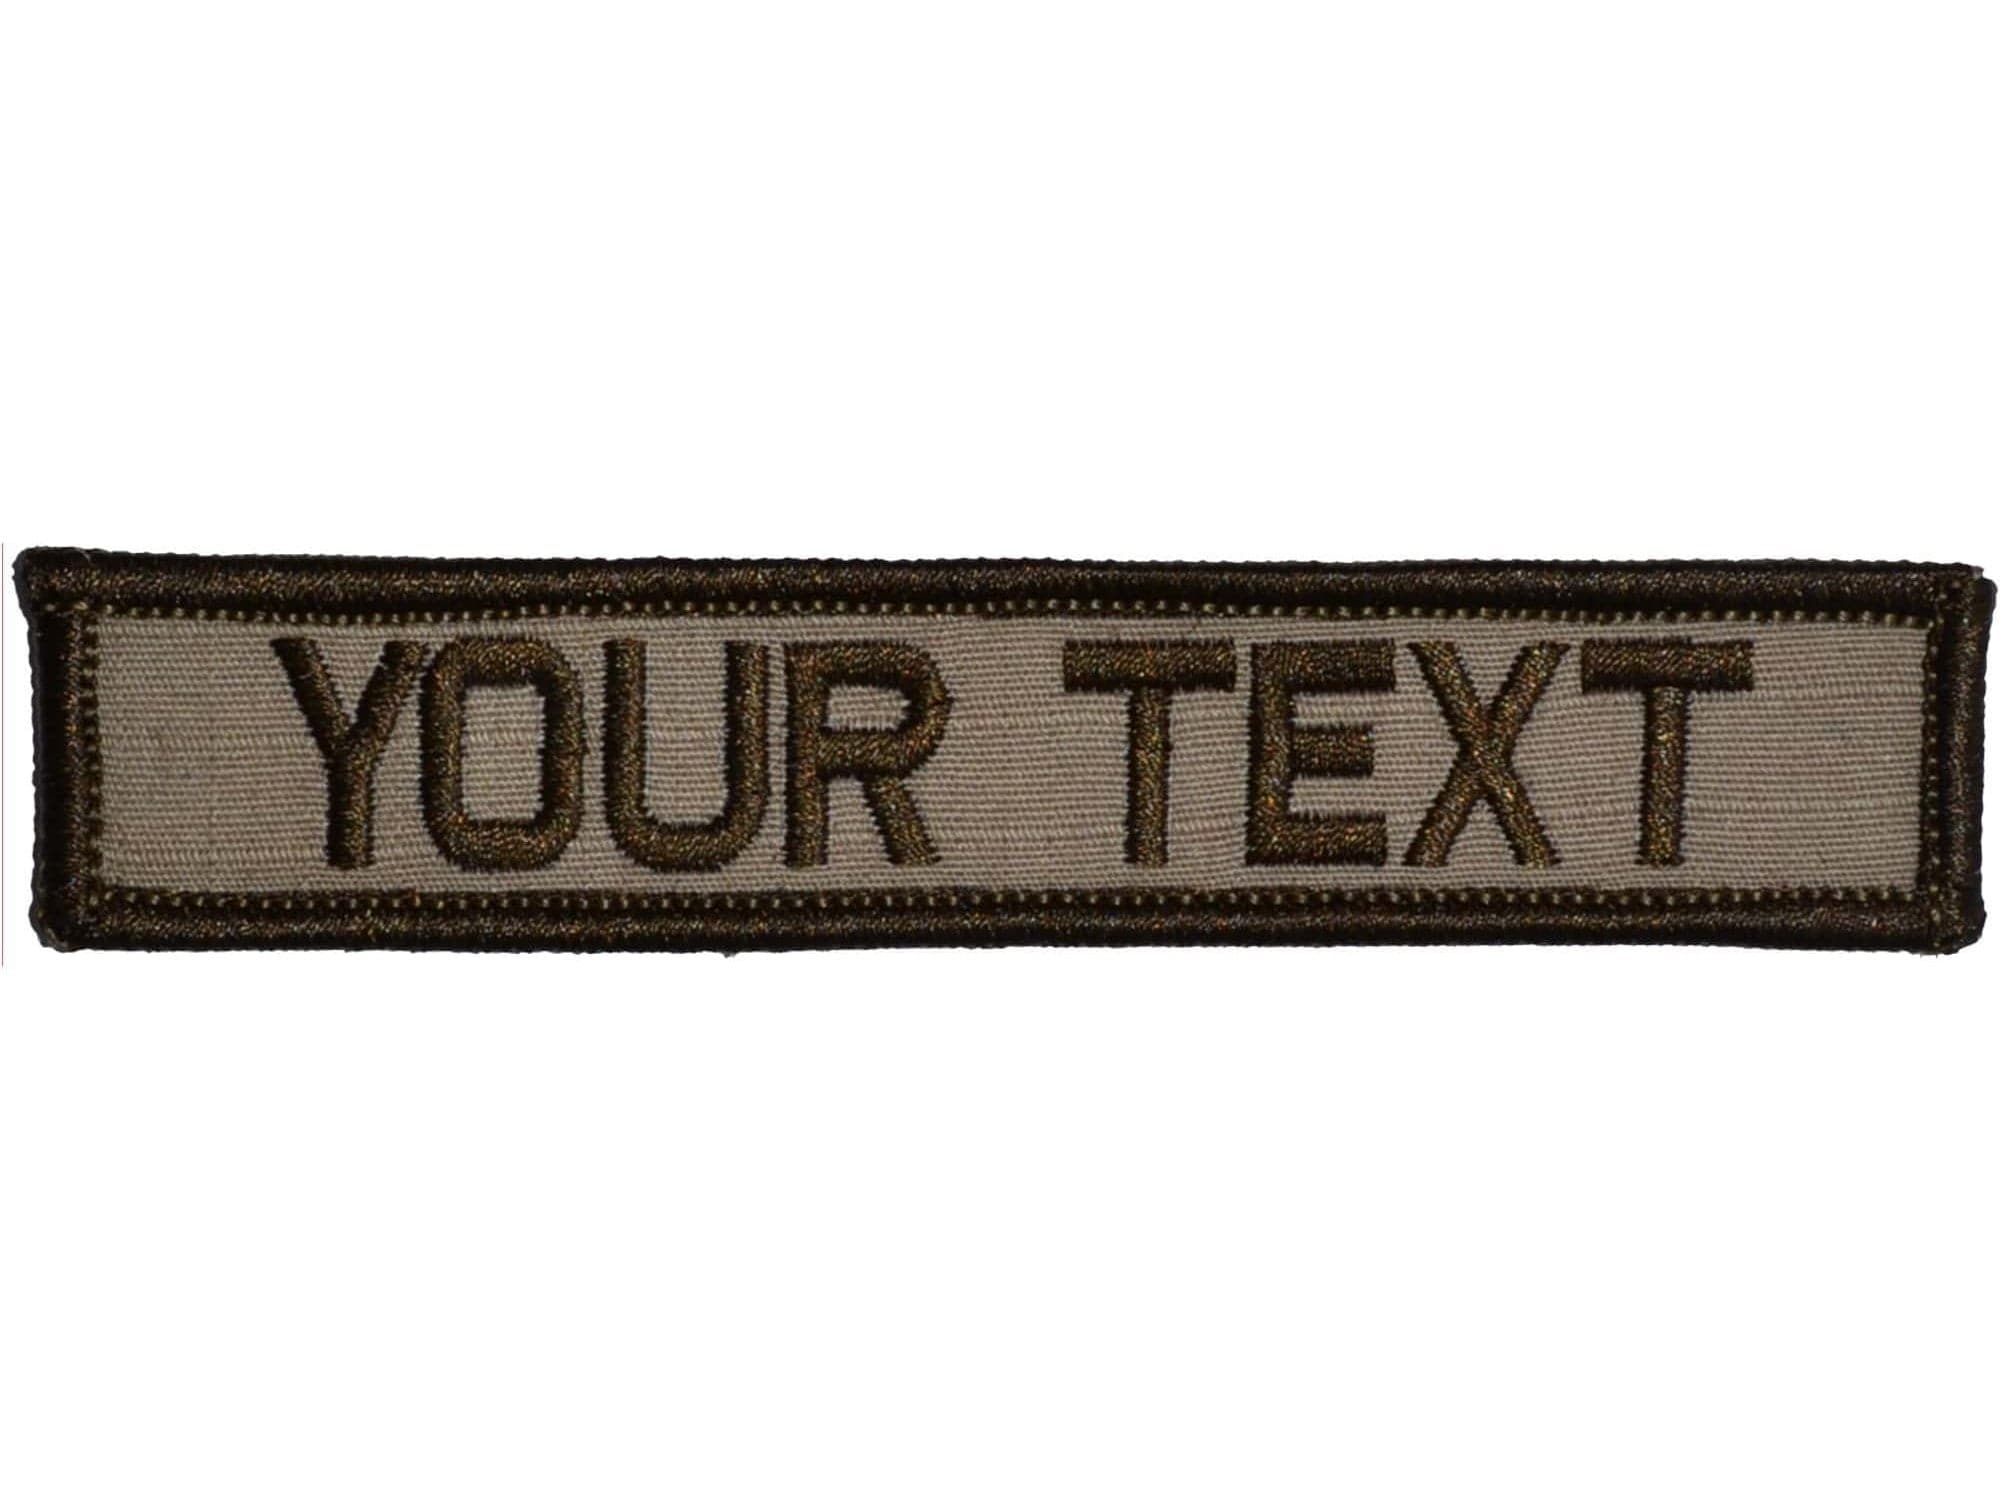 Custom Text 1x5 inch Patch. Your Text.